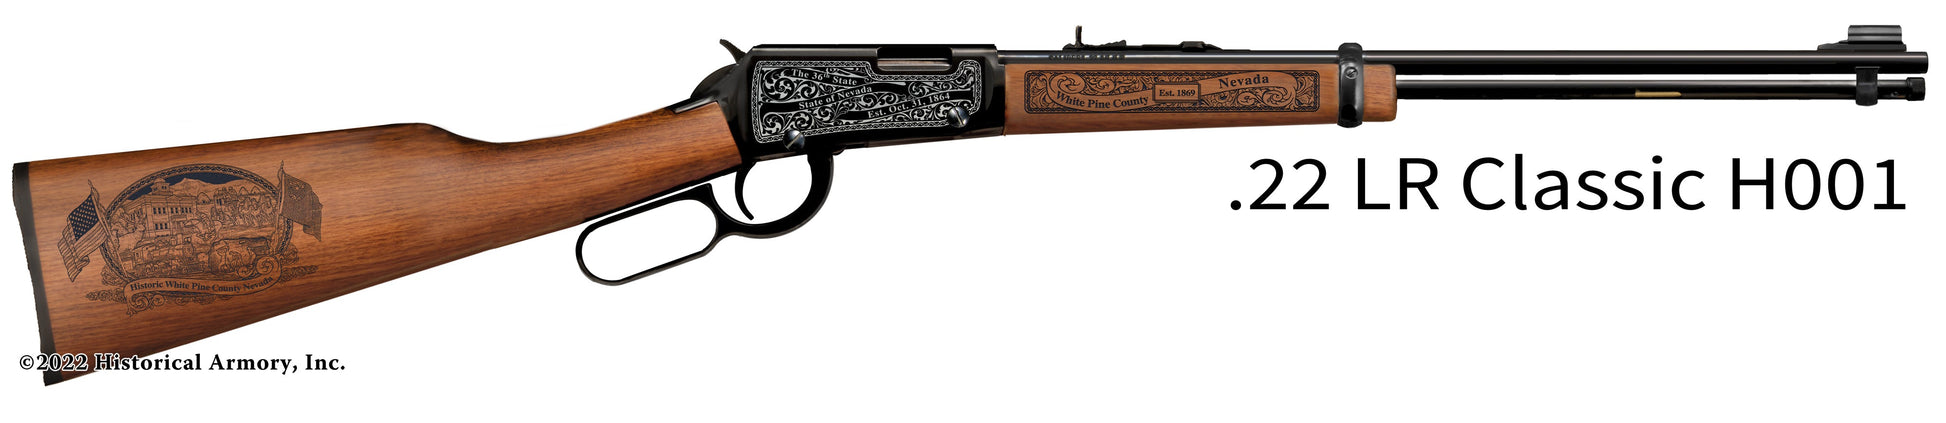 White Pine County Nevada Engraved Henry H001 Rifle